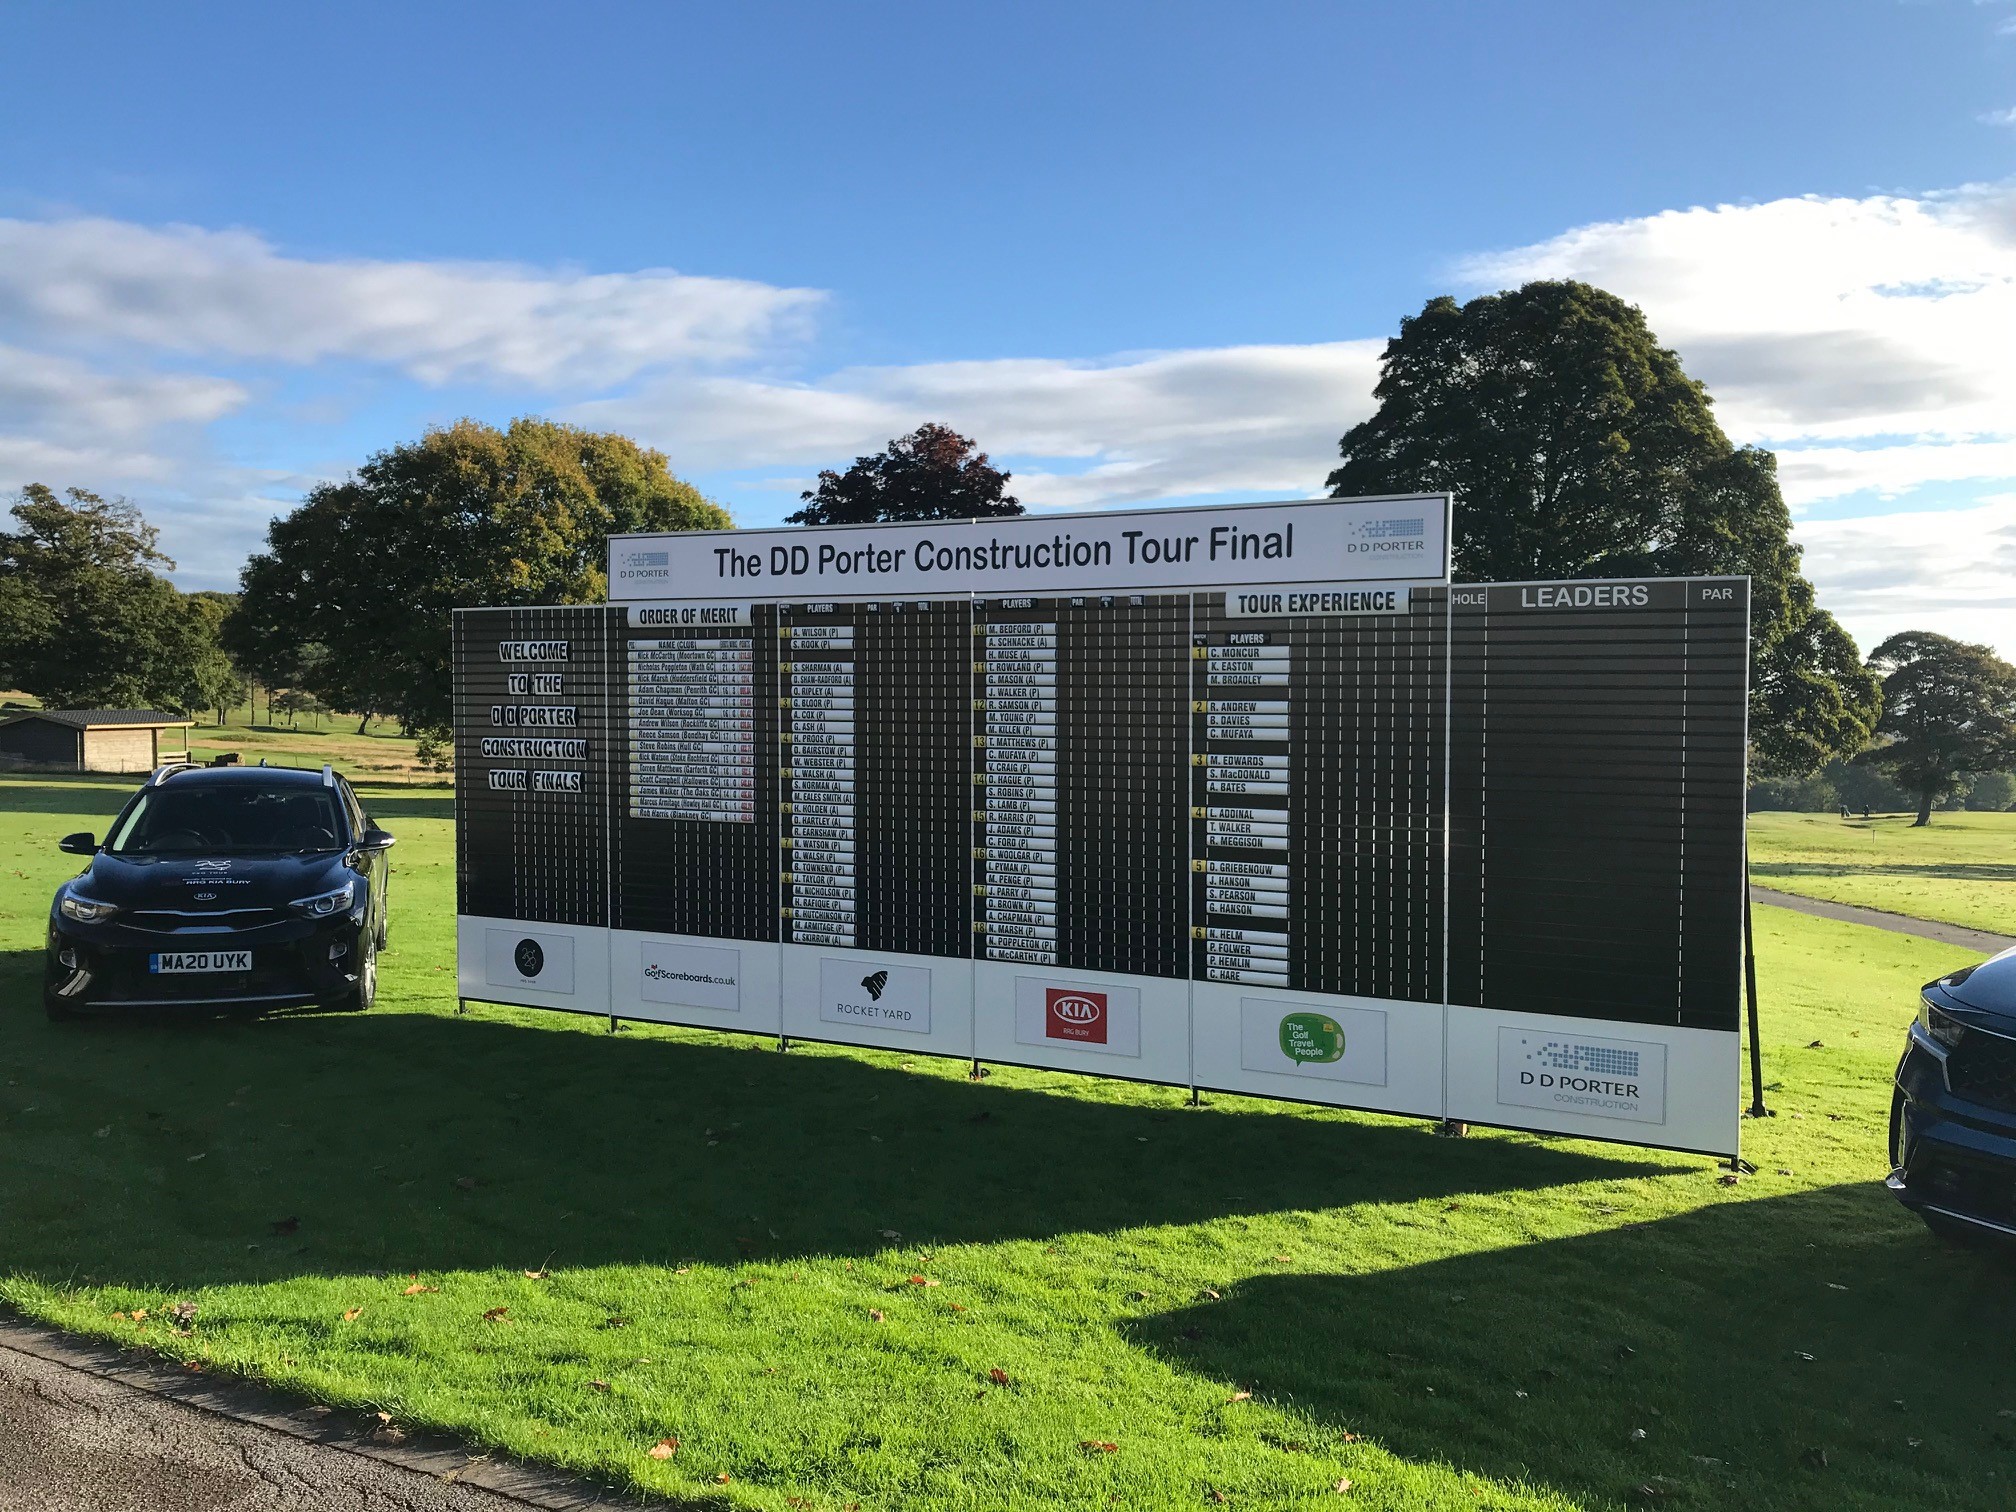 Golf, corporate, events, bespoke, special, days, charity, scoreboards, leaderboards, signage, on-course, tournament, hire